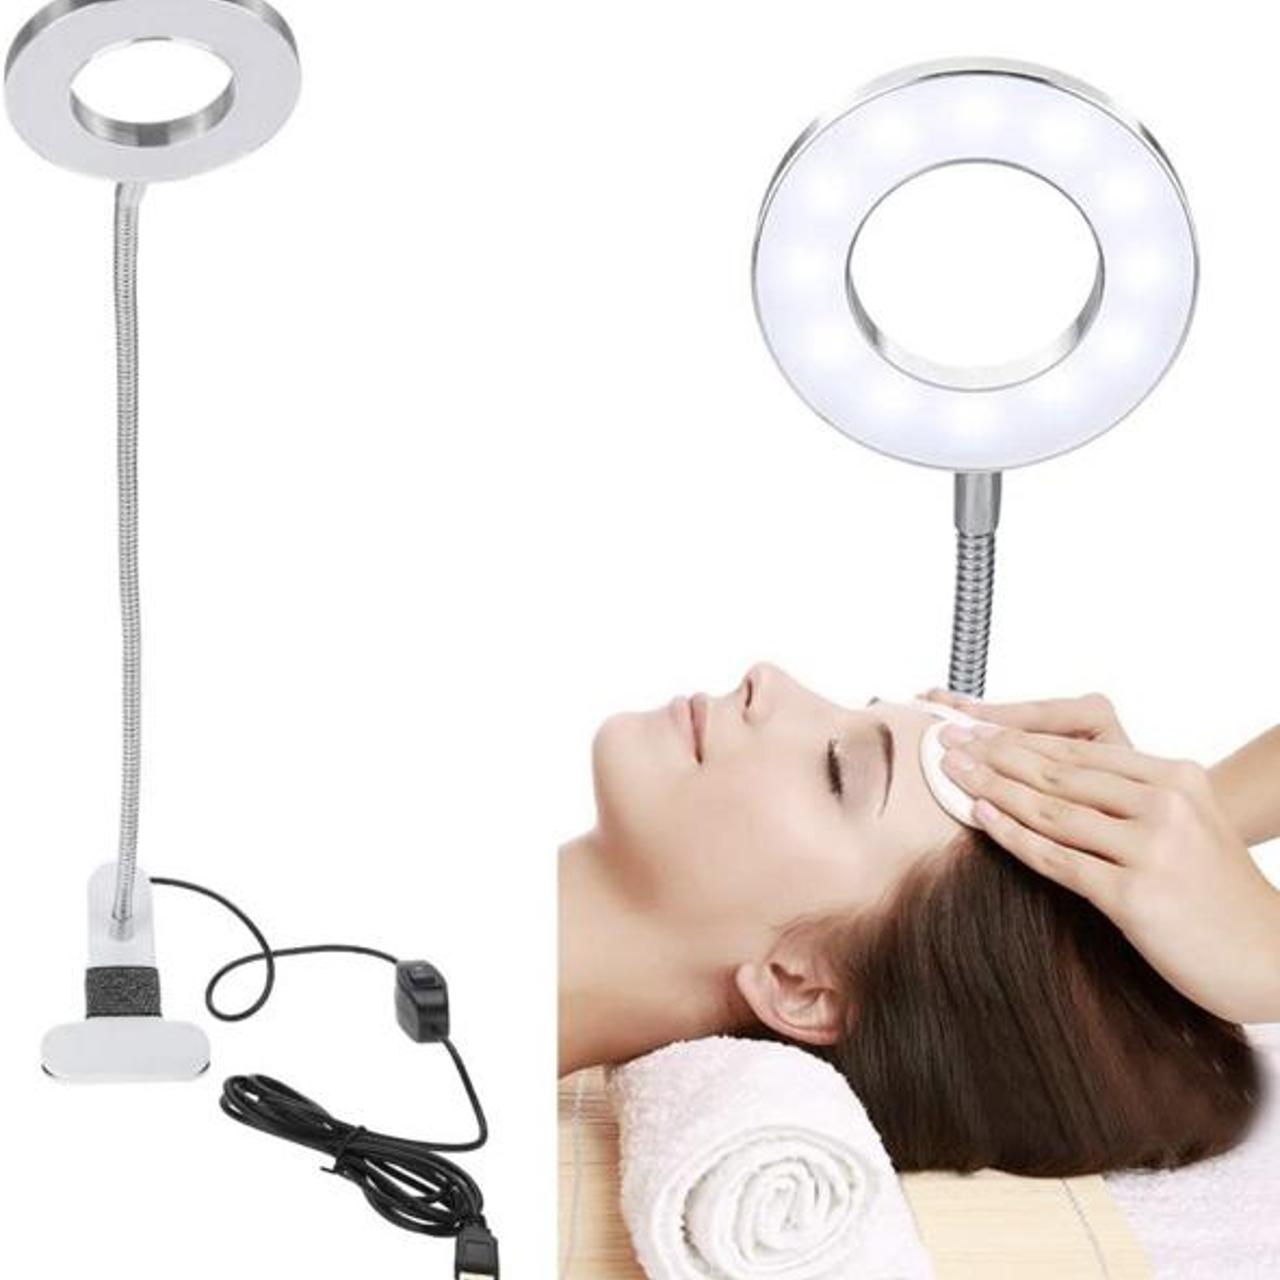 Product Image 1 - Beauty clip on lamp
Great lighting